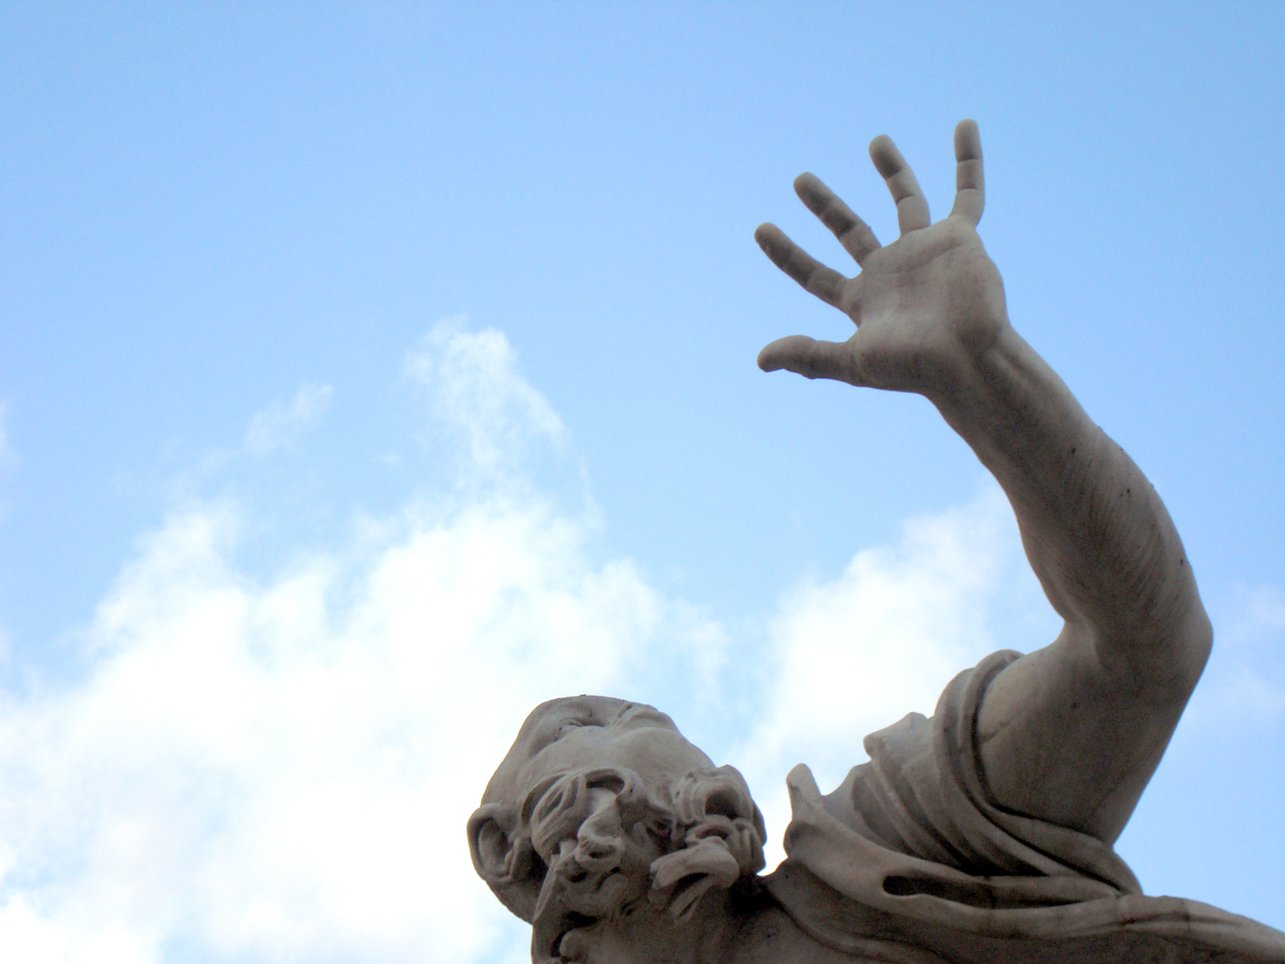 there is a statue of a person reaching up into the sky